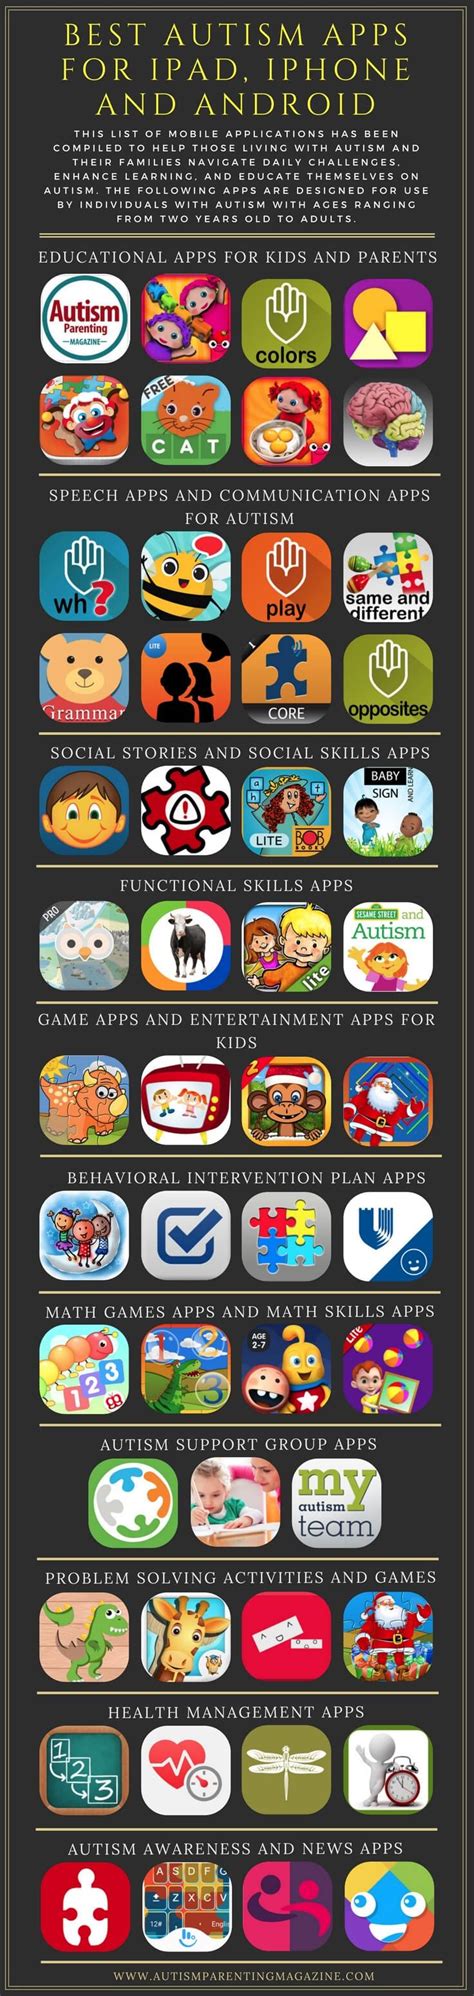 The app offers animations, games, books, songs, puzzles, and coloring activities. Best Autism Apps For iPad, iPhone and Android - Ultimate Guide